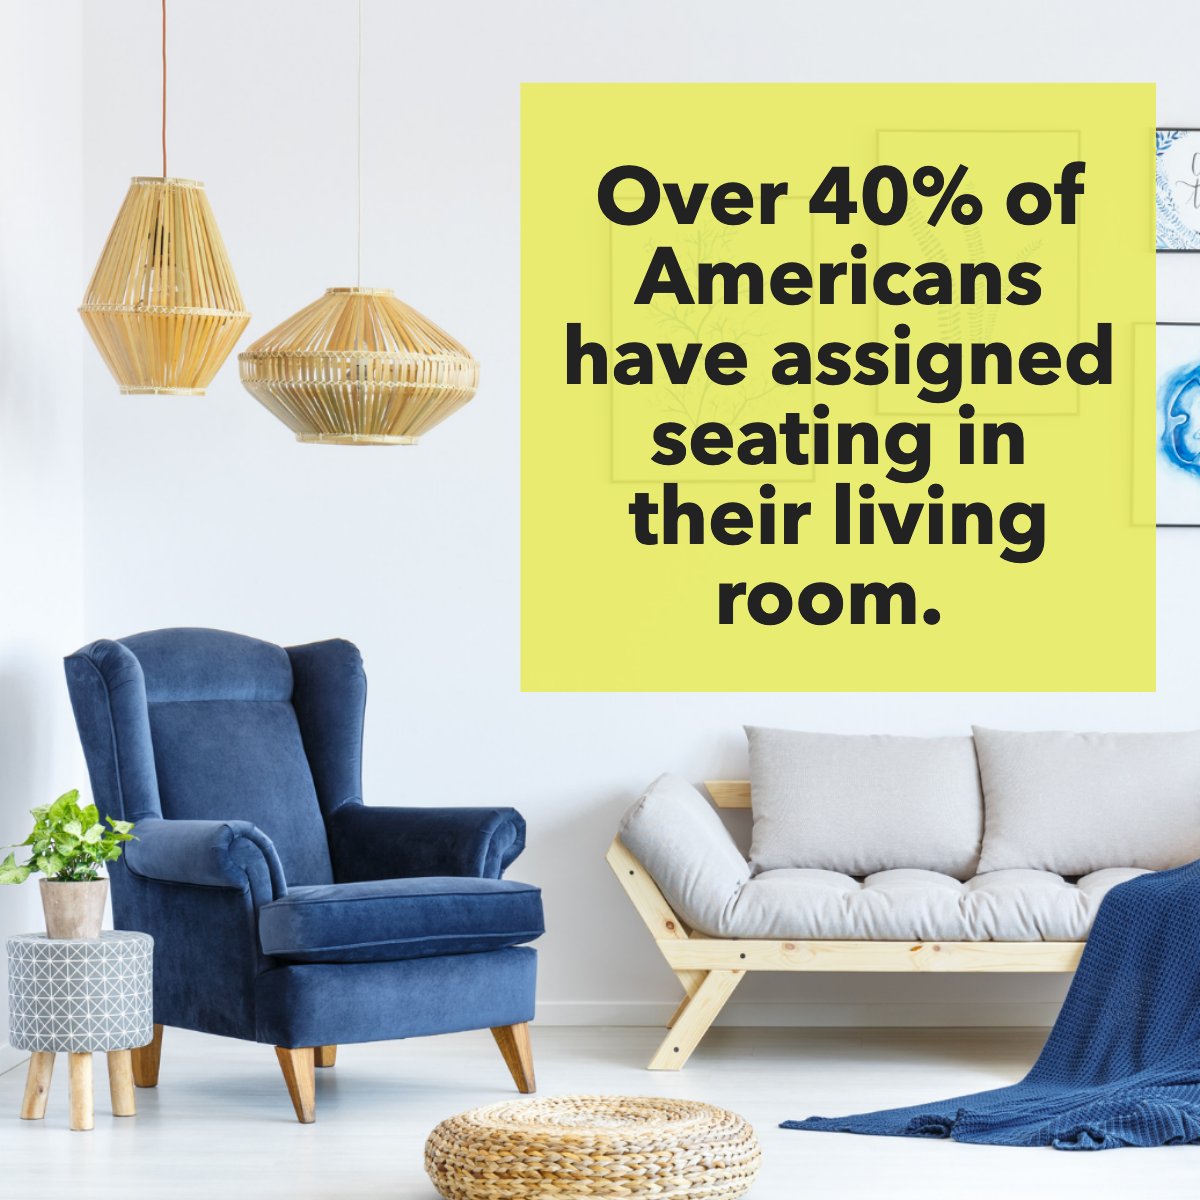 Do you have assigned seating at home? 🛋️

Let us know below!

#tv #home #tvhome #favoriteshow #fact #didyounknow
 #RiversideRealestate #RiversideHomes #RiversideBroker #JamesCottrell #jamesforhomes